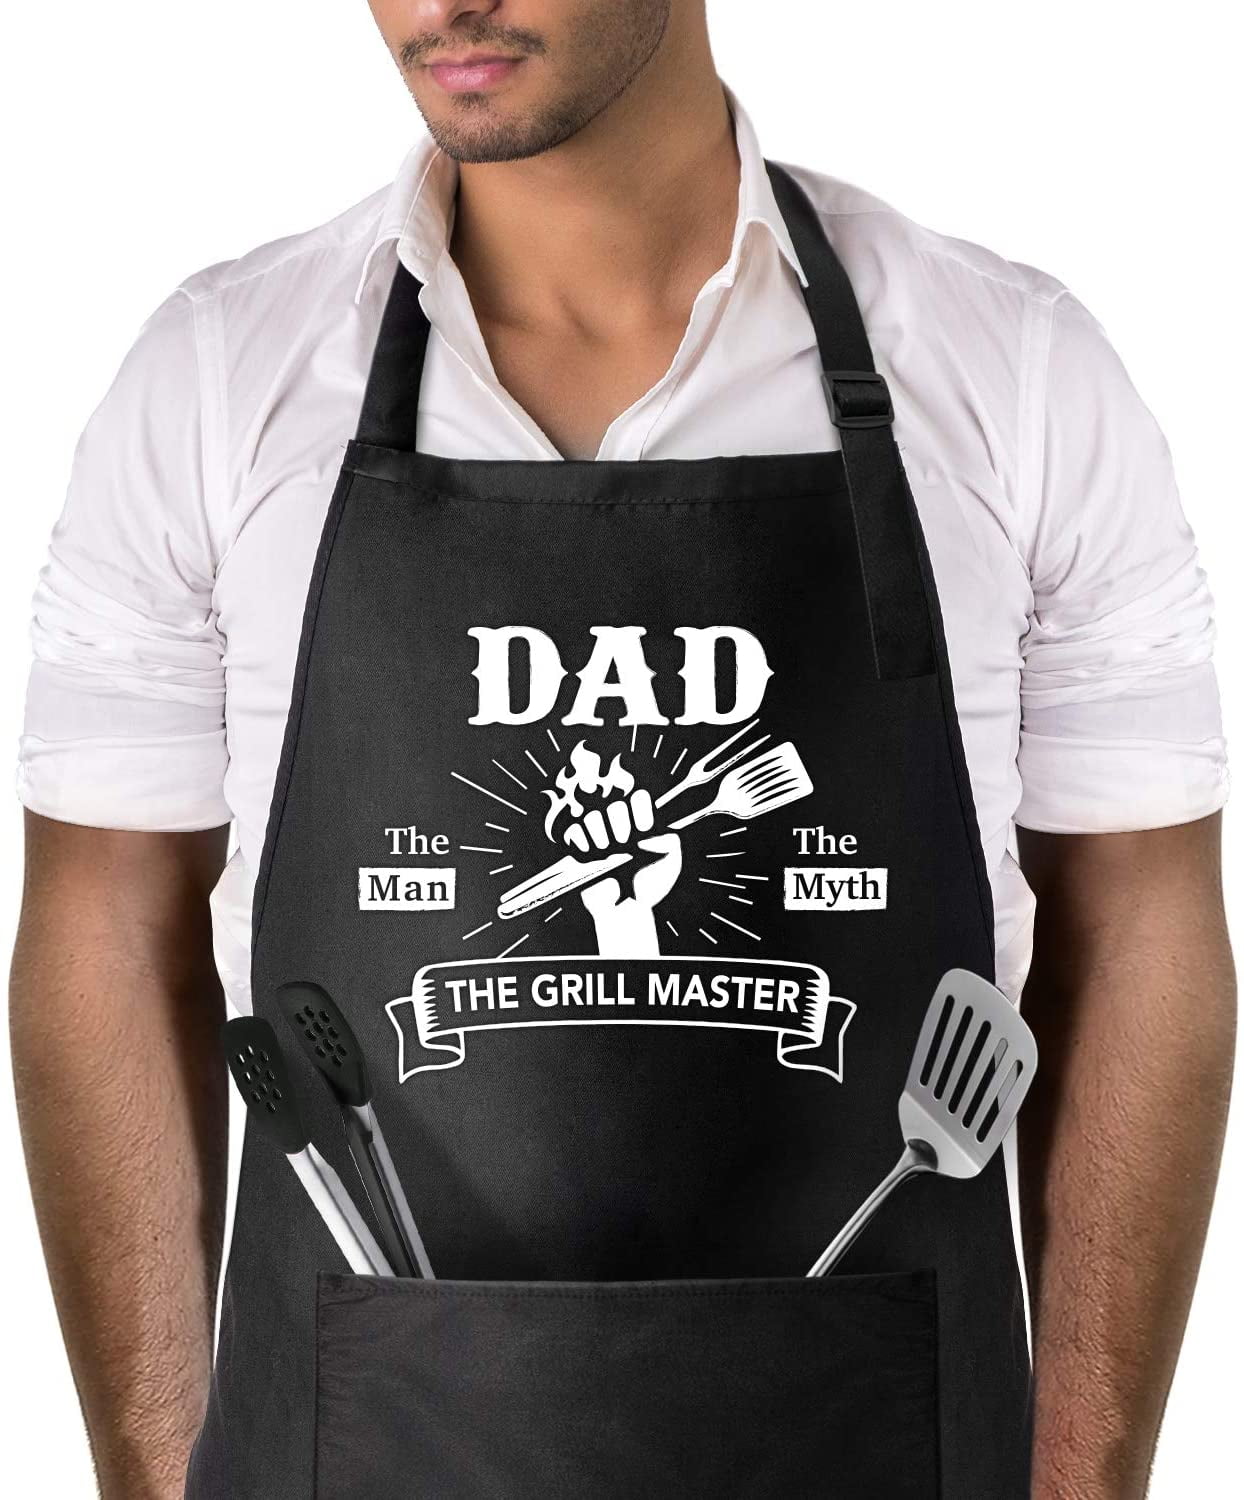 FORTIVO Cooking Aprons For Men, Grill Apron Men, Apron For Men, Apron With  Pockets, Cooking Gifts For Men, Kitchen Aprons For Men, Chef Aprons For